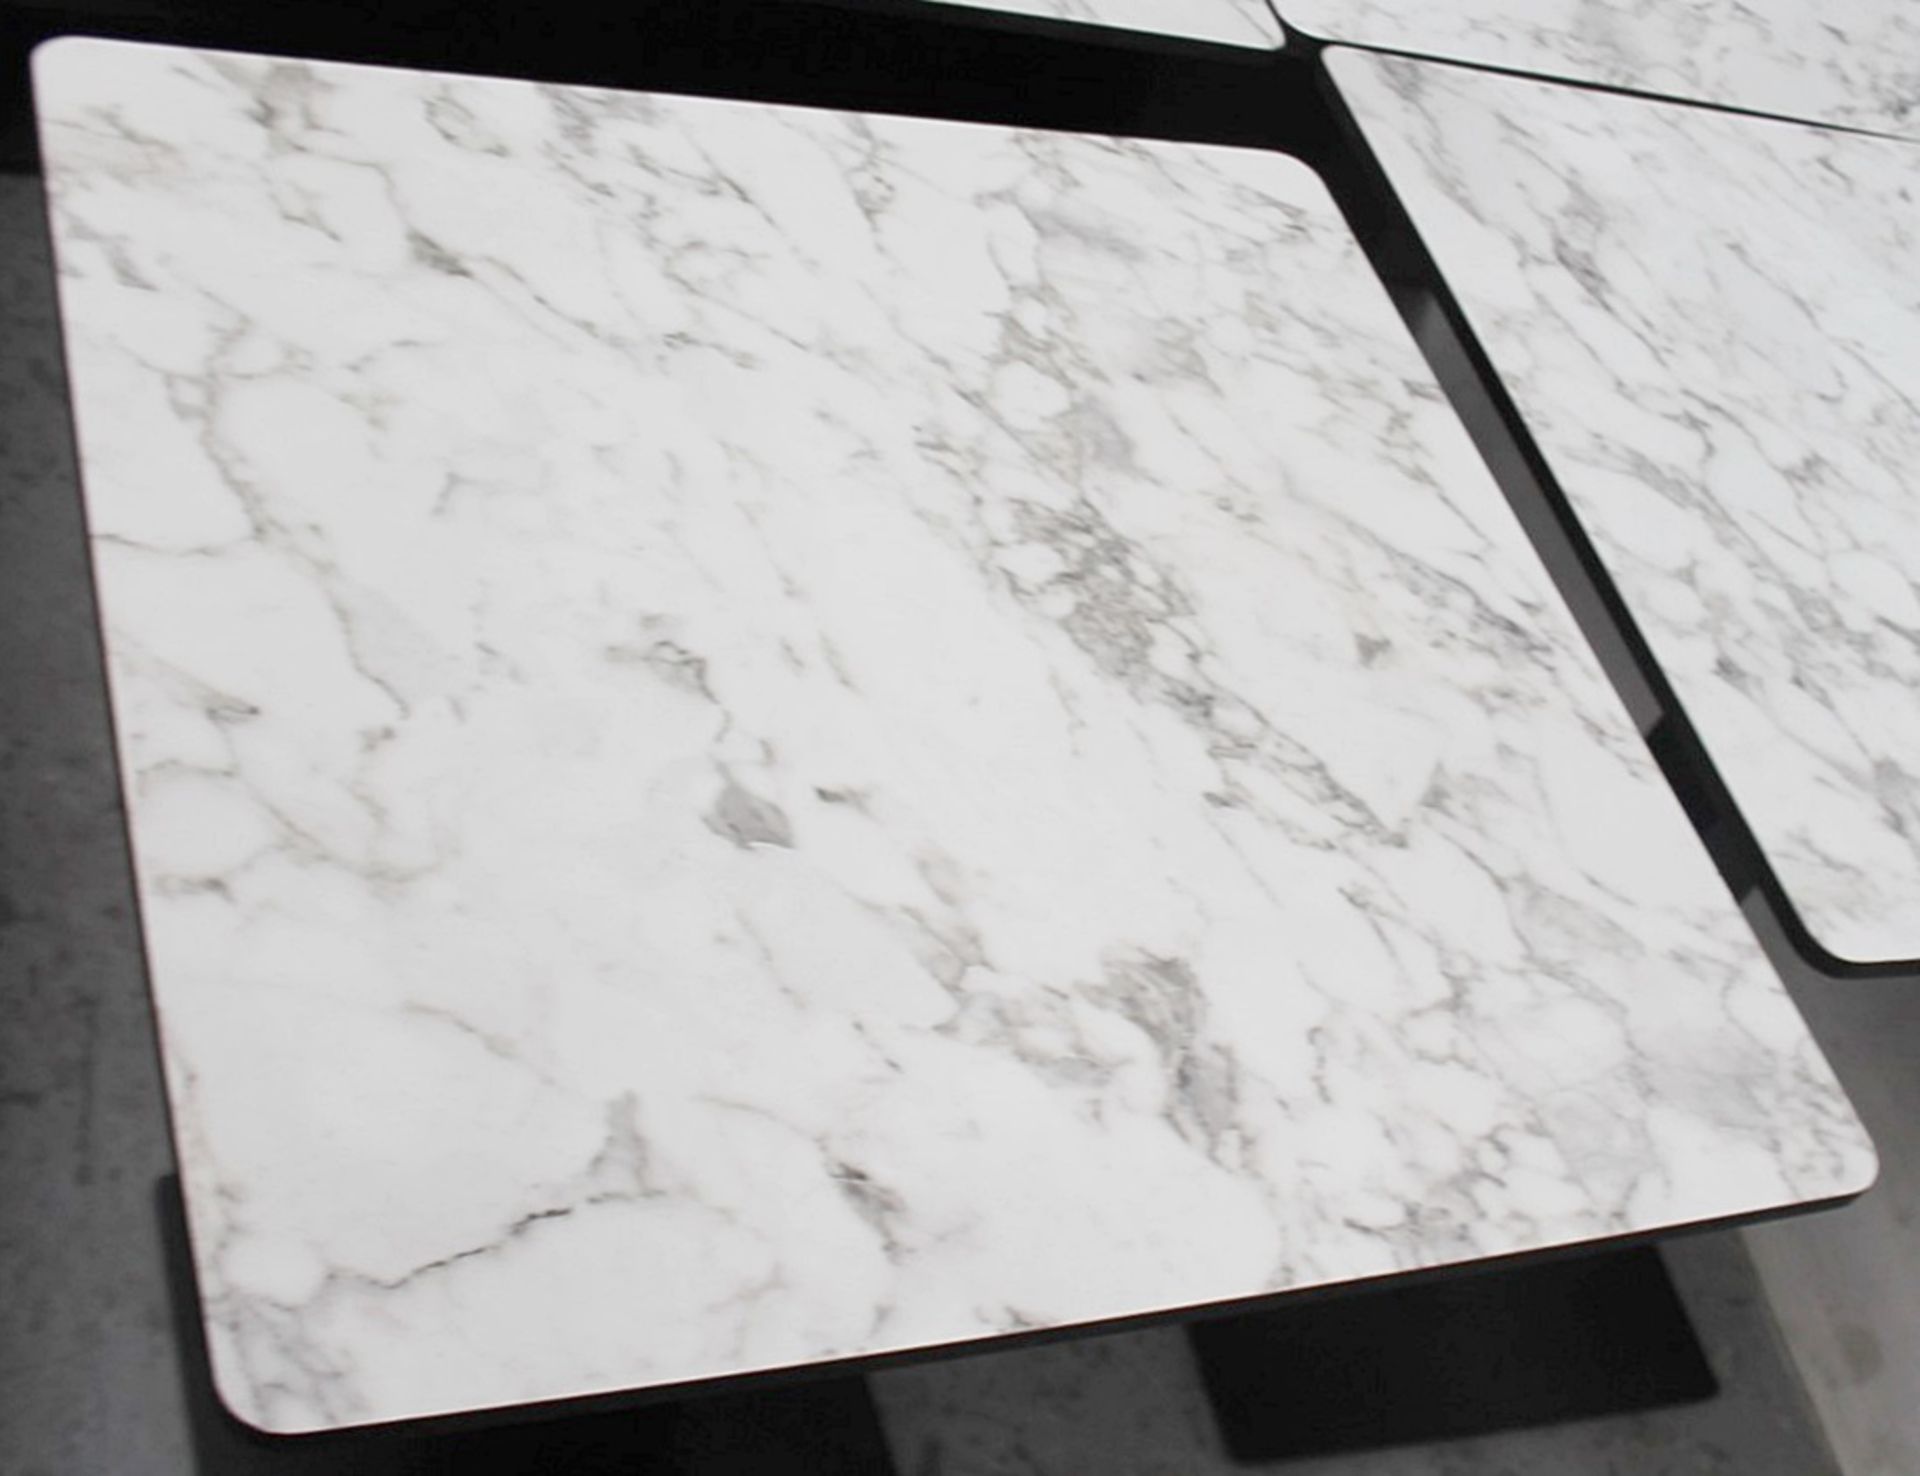 4 x Bistro Tables Featuring 'EXTREMA' Heavy-duty Tops With A White Marble-Style Finish, And Robust - Image 3 of 4